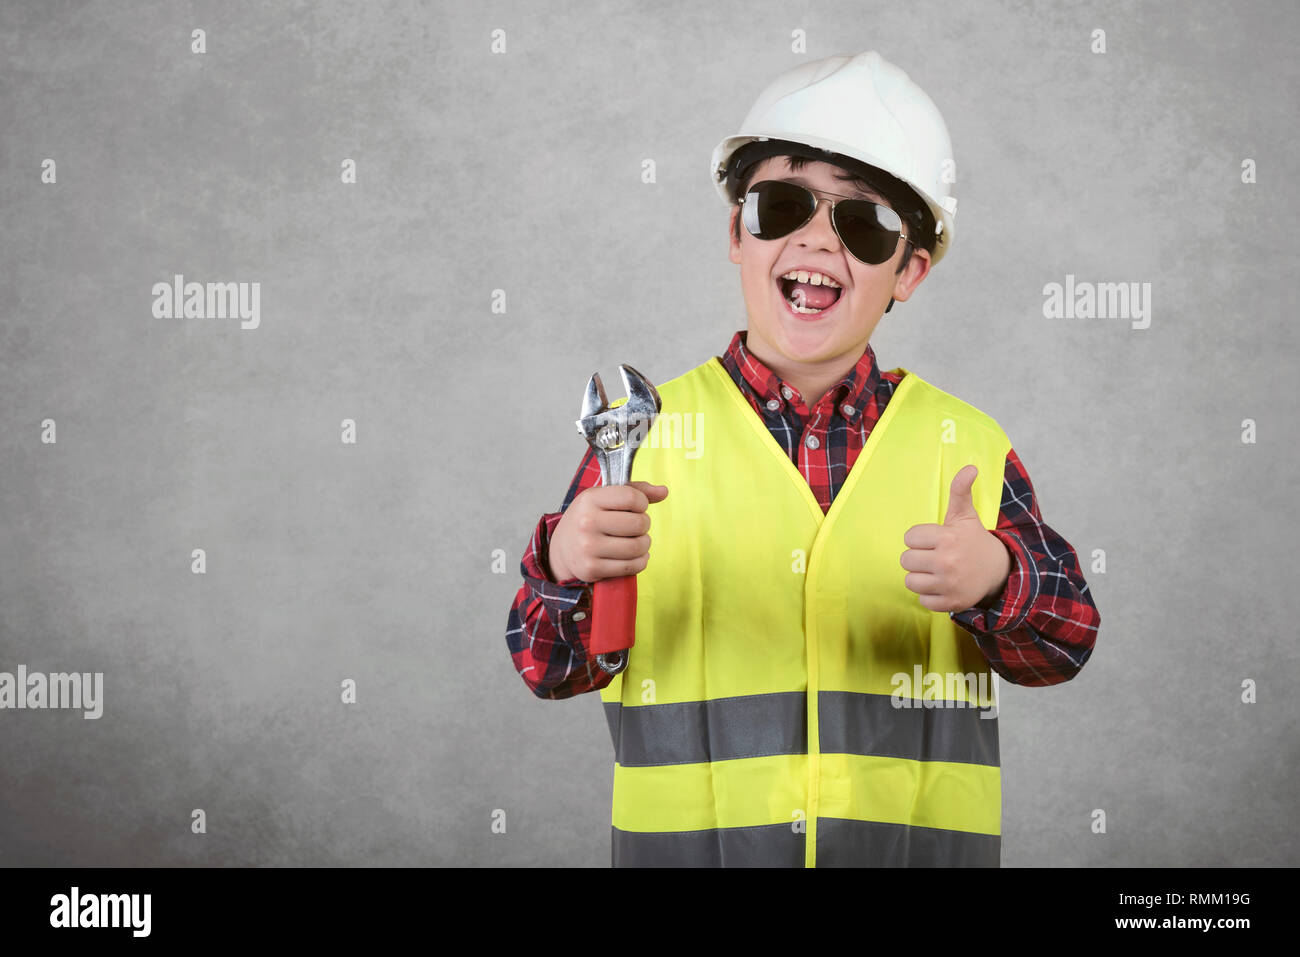 little child construction worker in White helmet and sunglasses and holding a wrench  against gray background Stock Photo